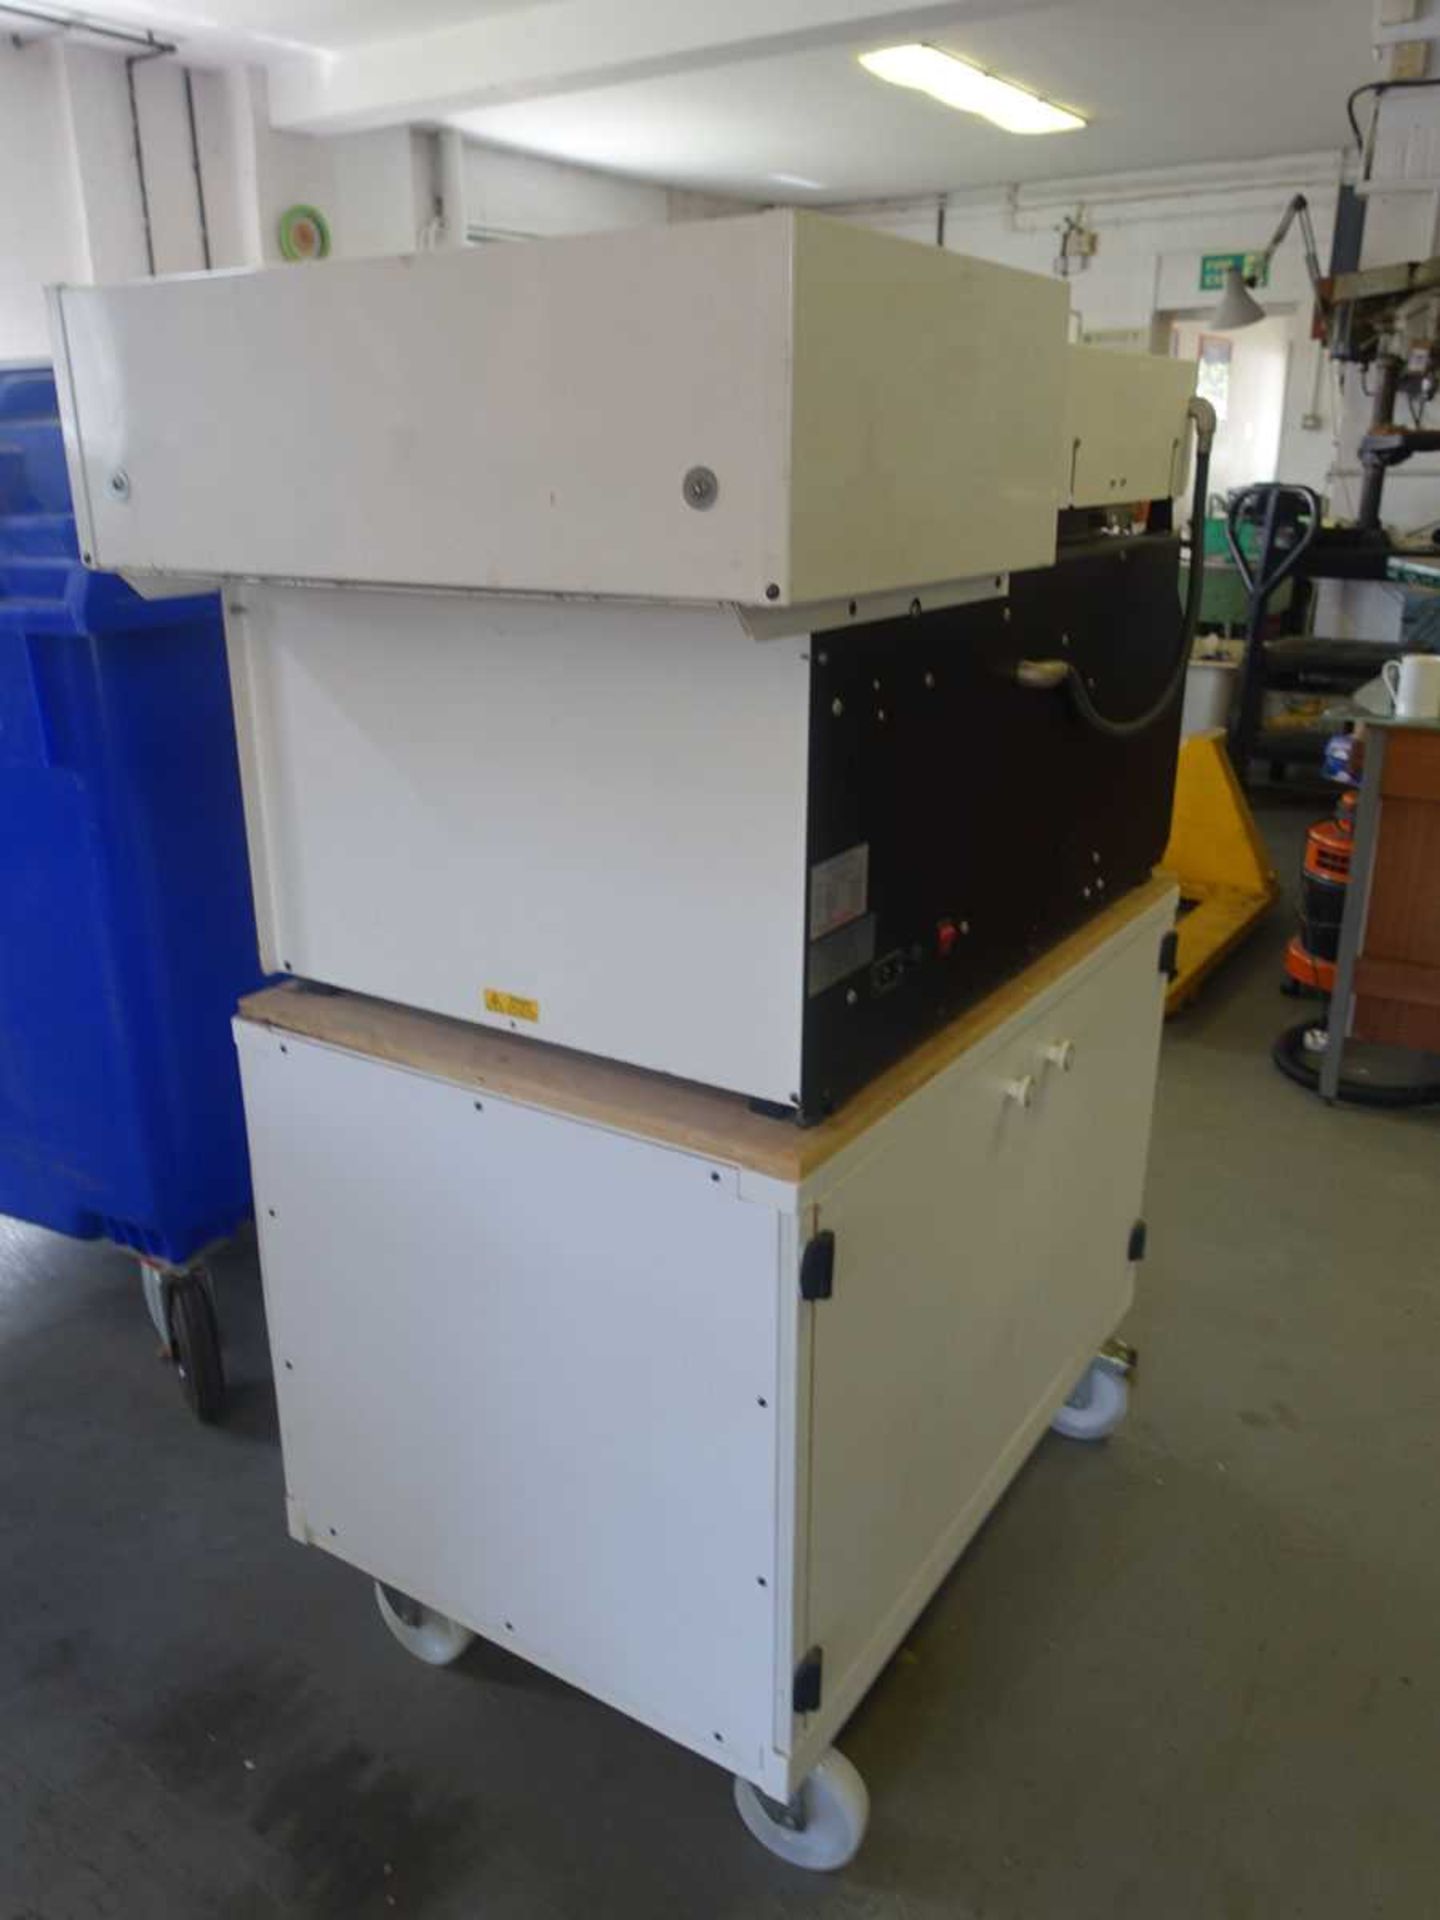 +VAT Formech 300X quartz heated plastic vacuum forming machine, single phase electric with cabinet - Image 4 of 5